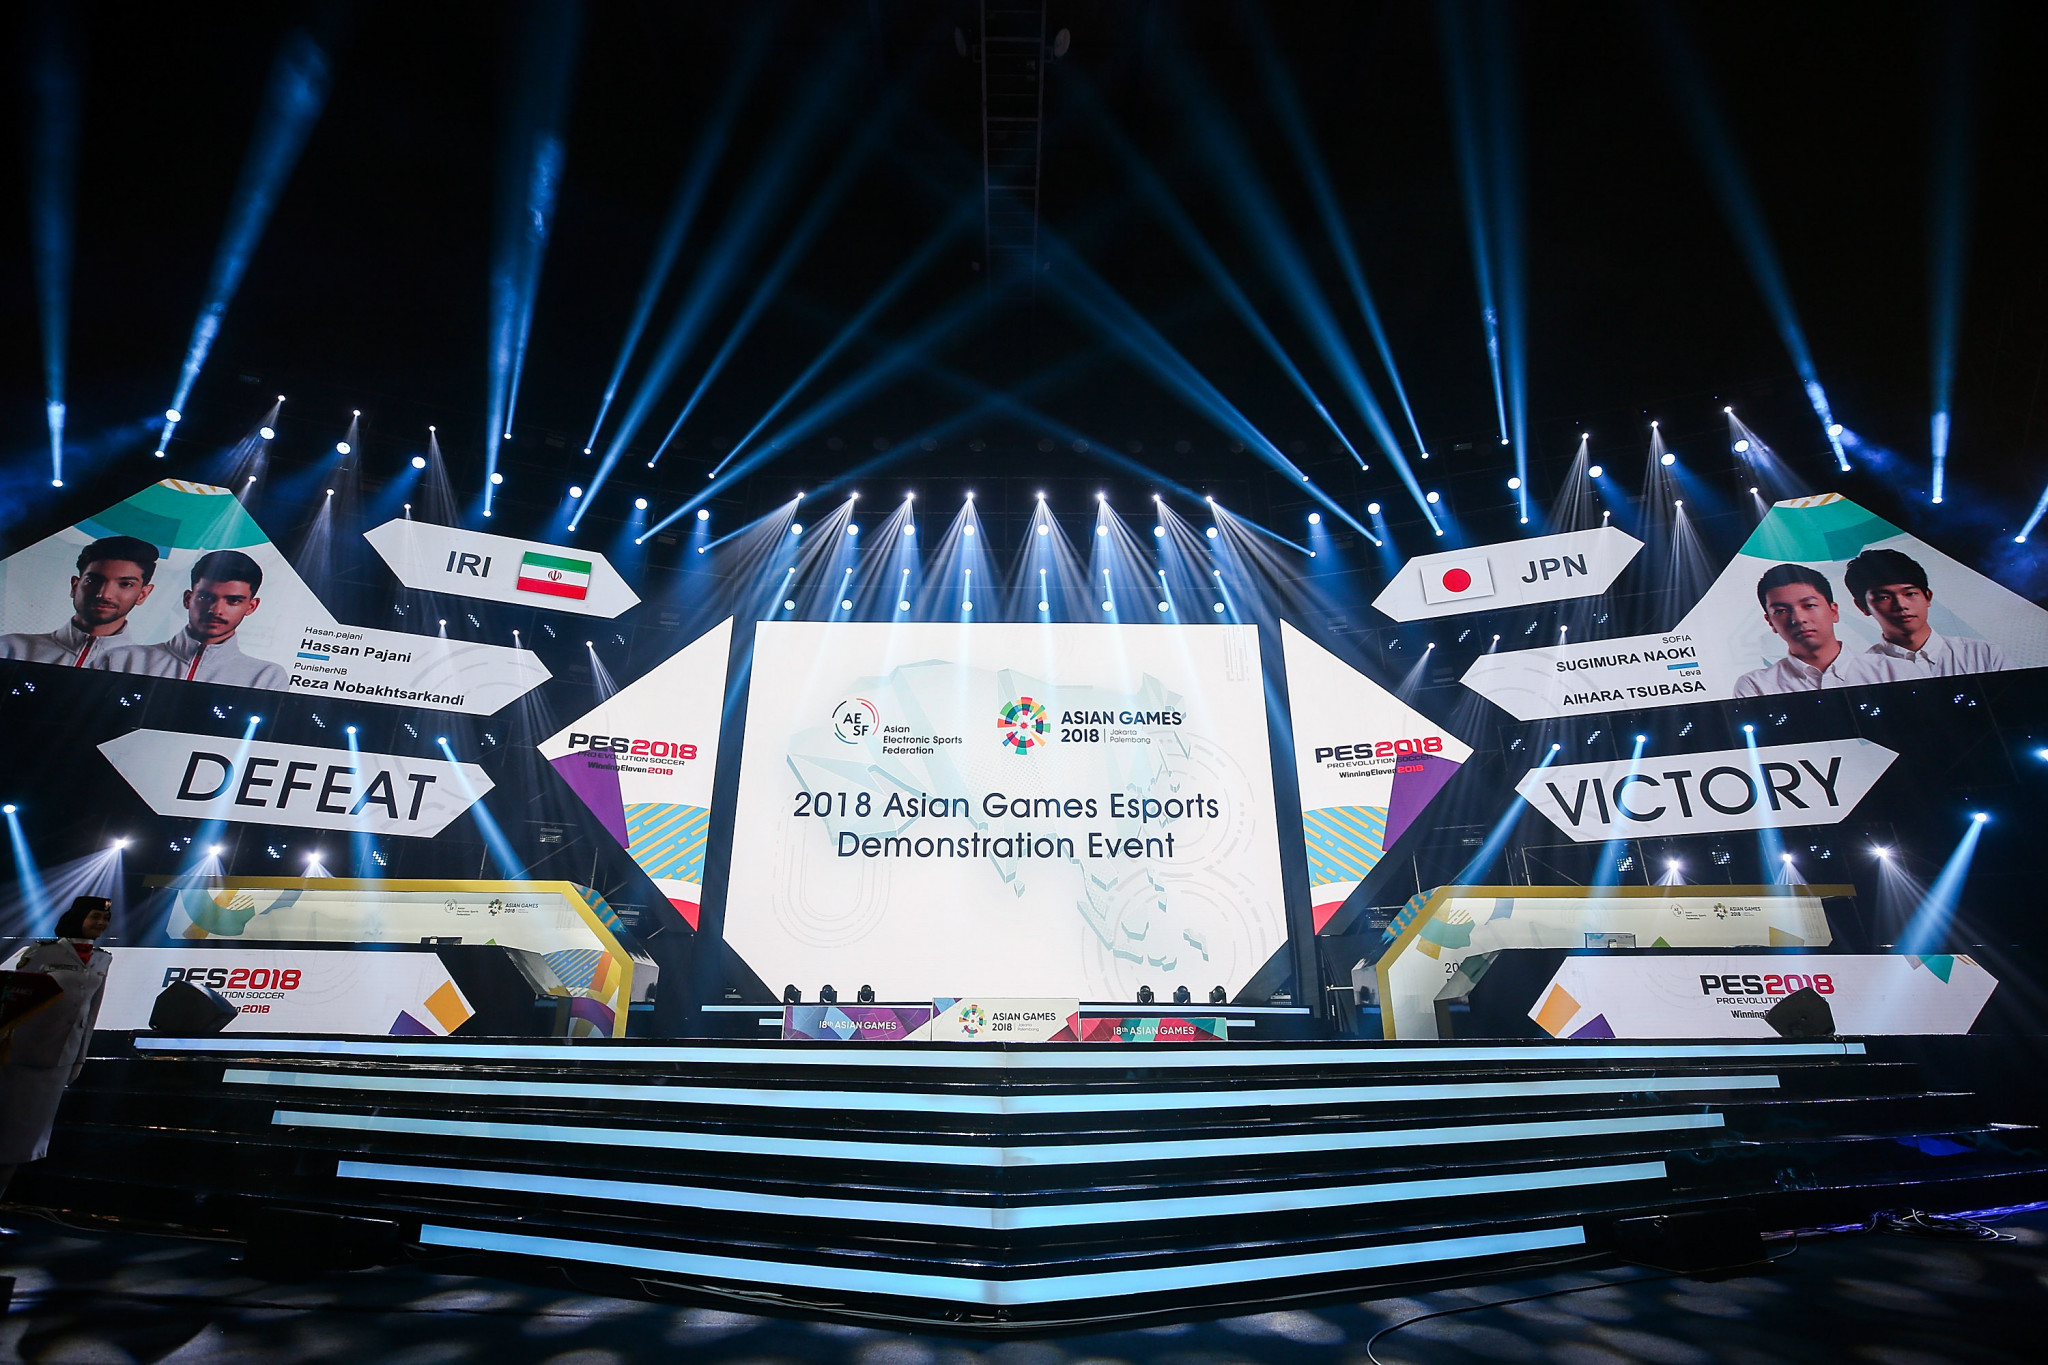 Esports featured as a demonstration event at the Asian Games in Jakarta-Palembang 2018, and the programme at Hangzhou 2022 includes eight esports medal events ©Getty Images